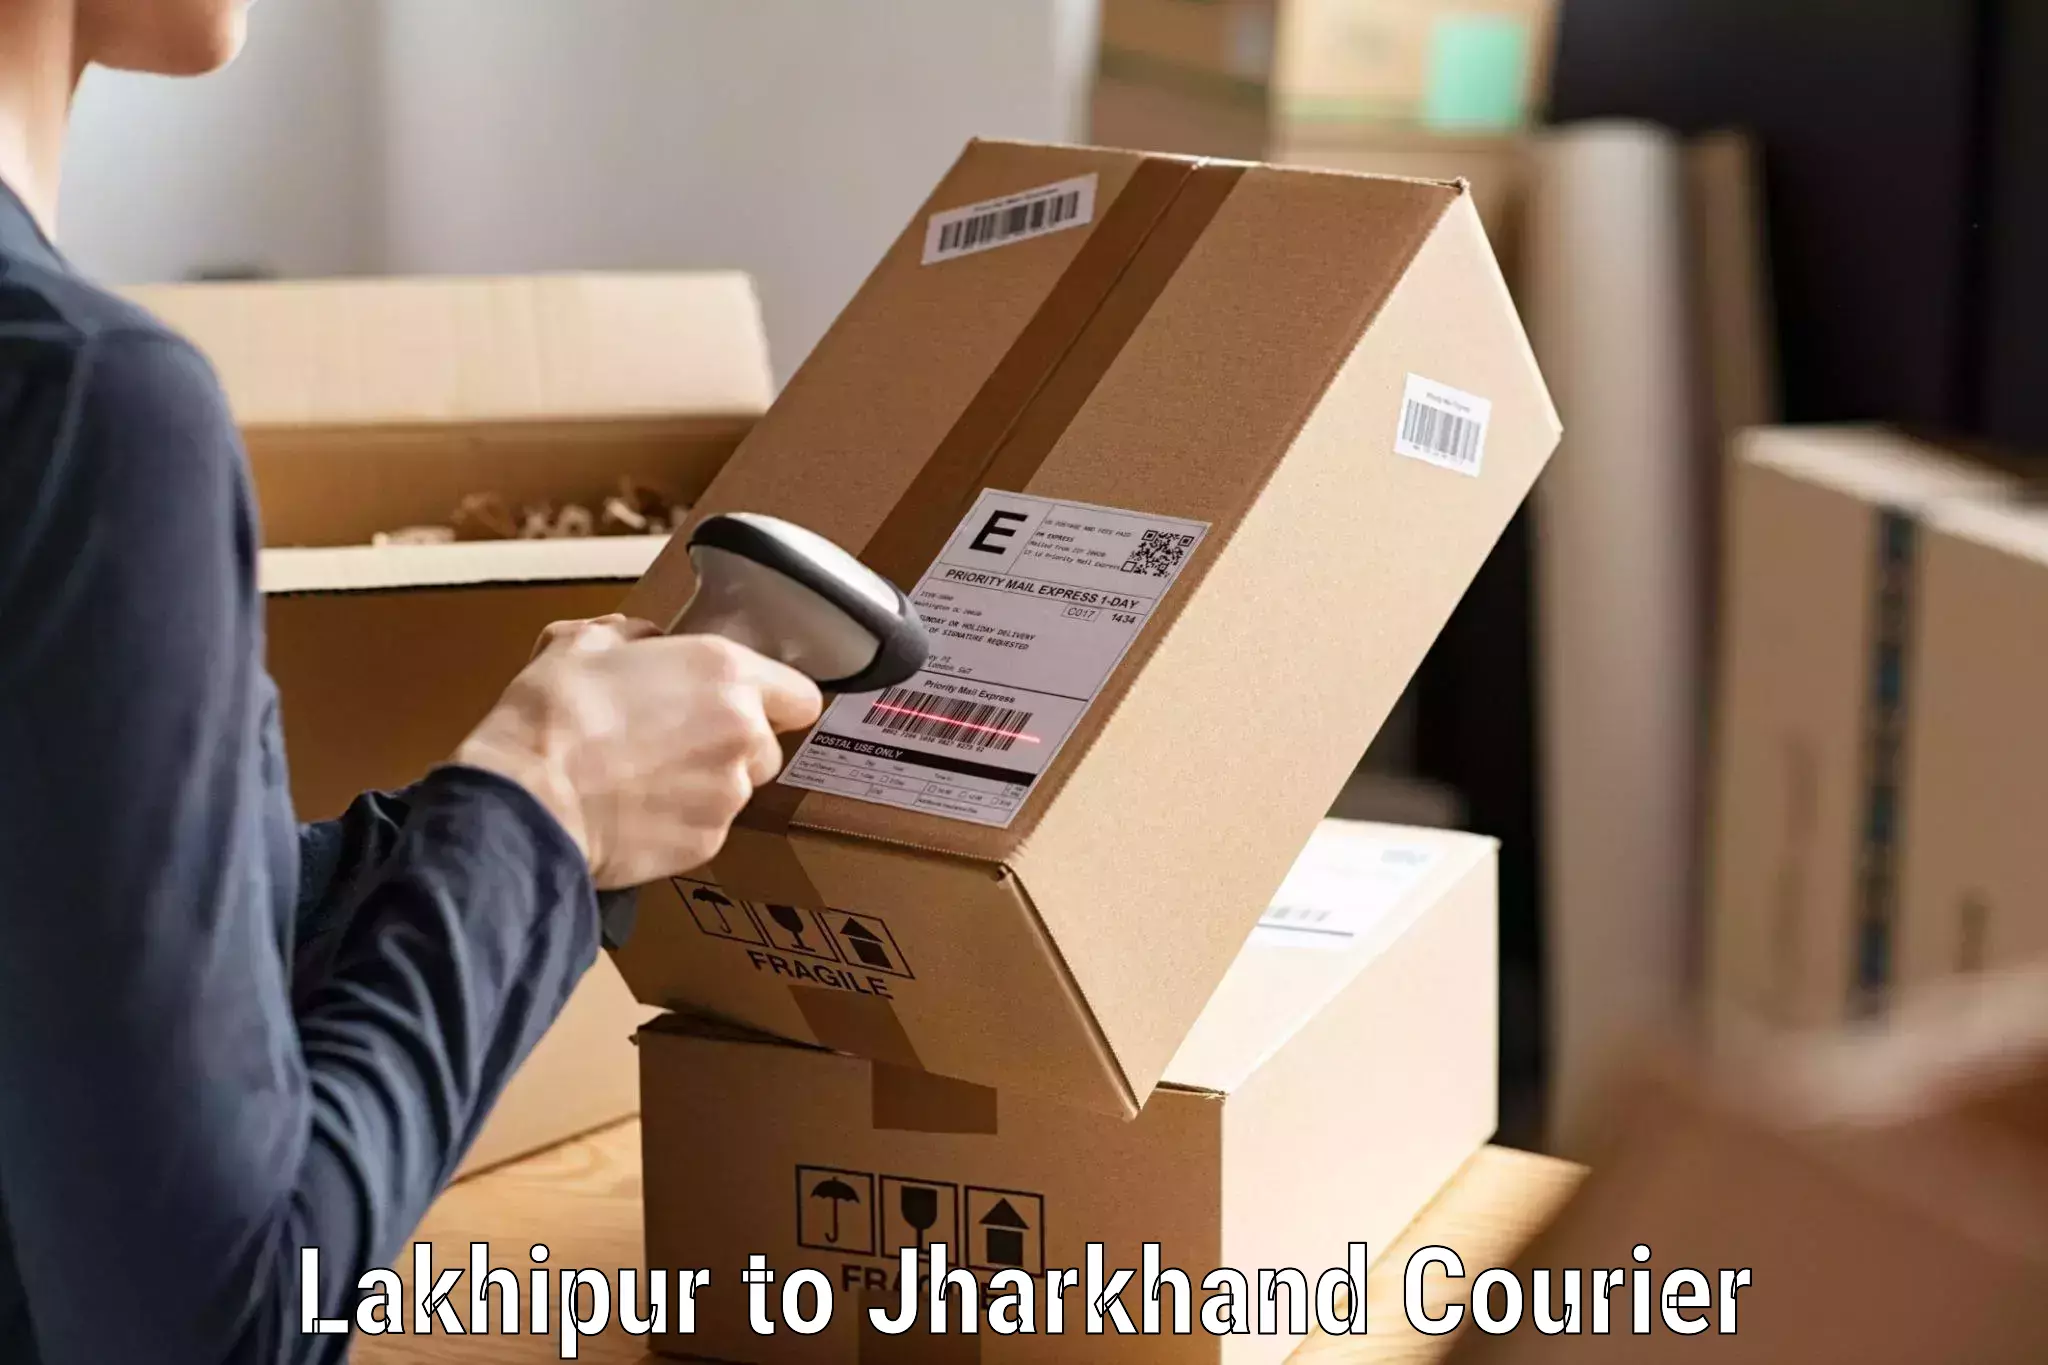 Courier service partnerships Lakhipur to Deoghar